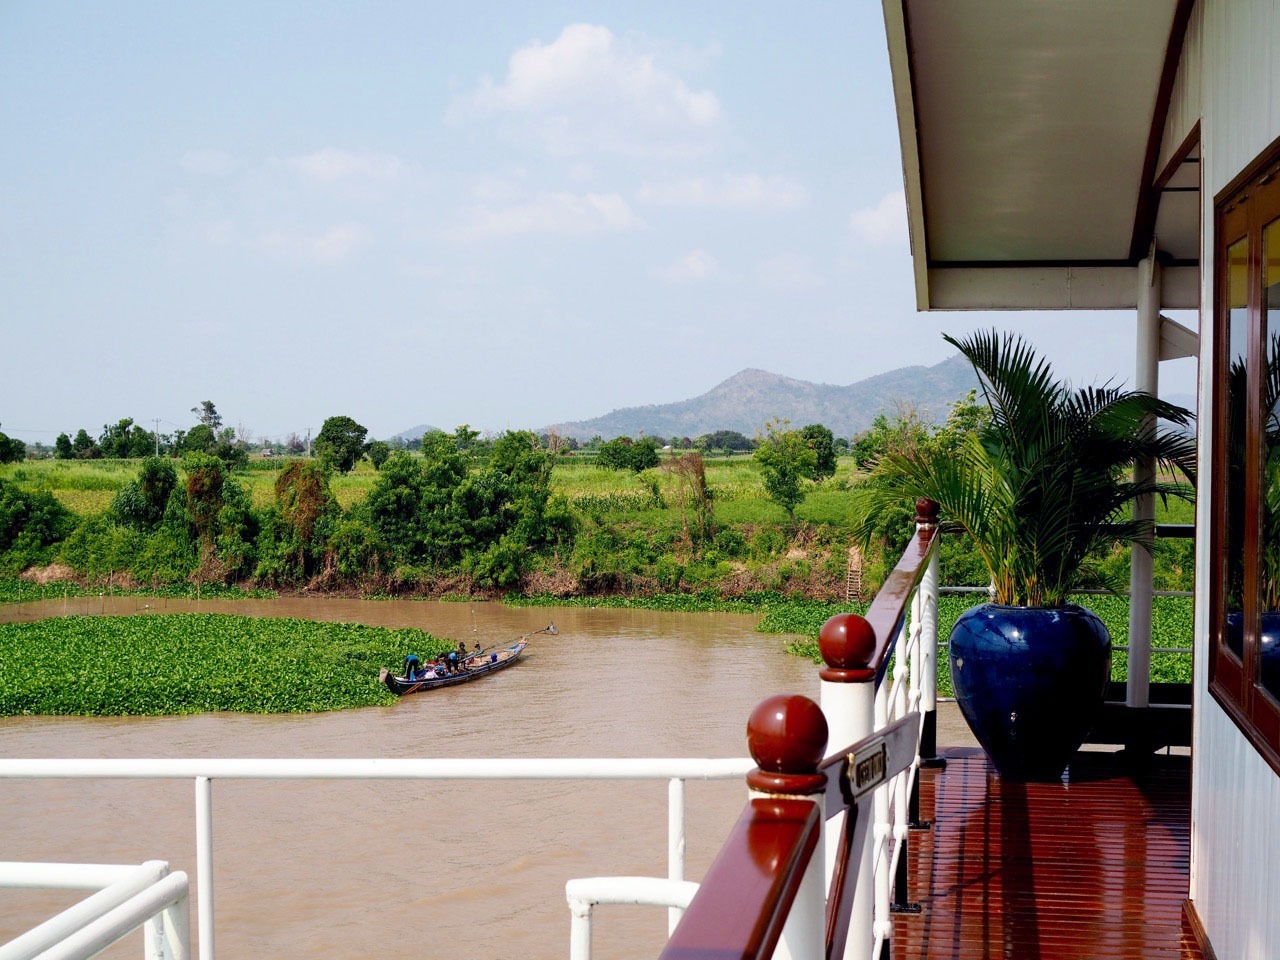 River Cruise on the Mekong